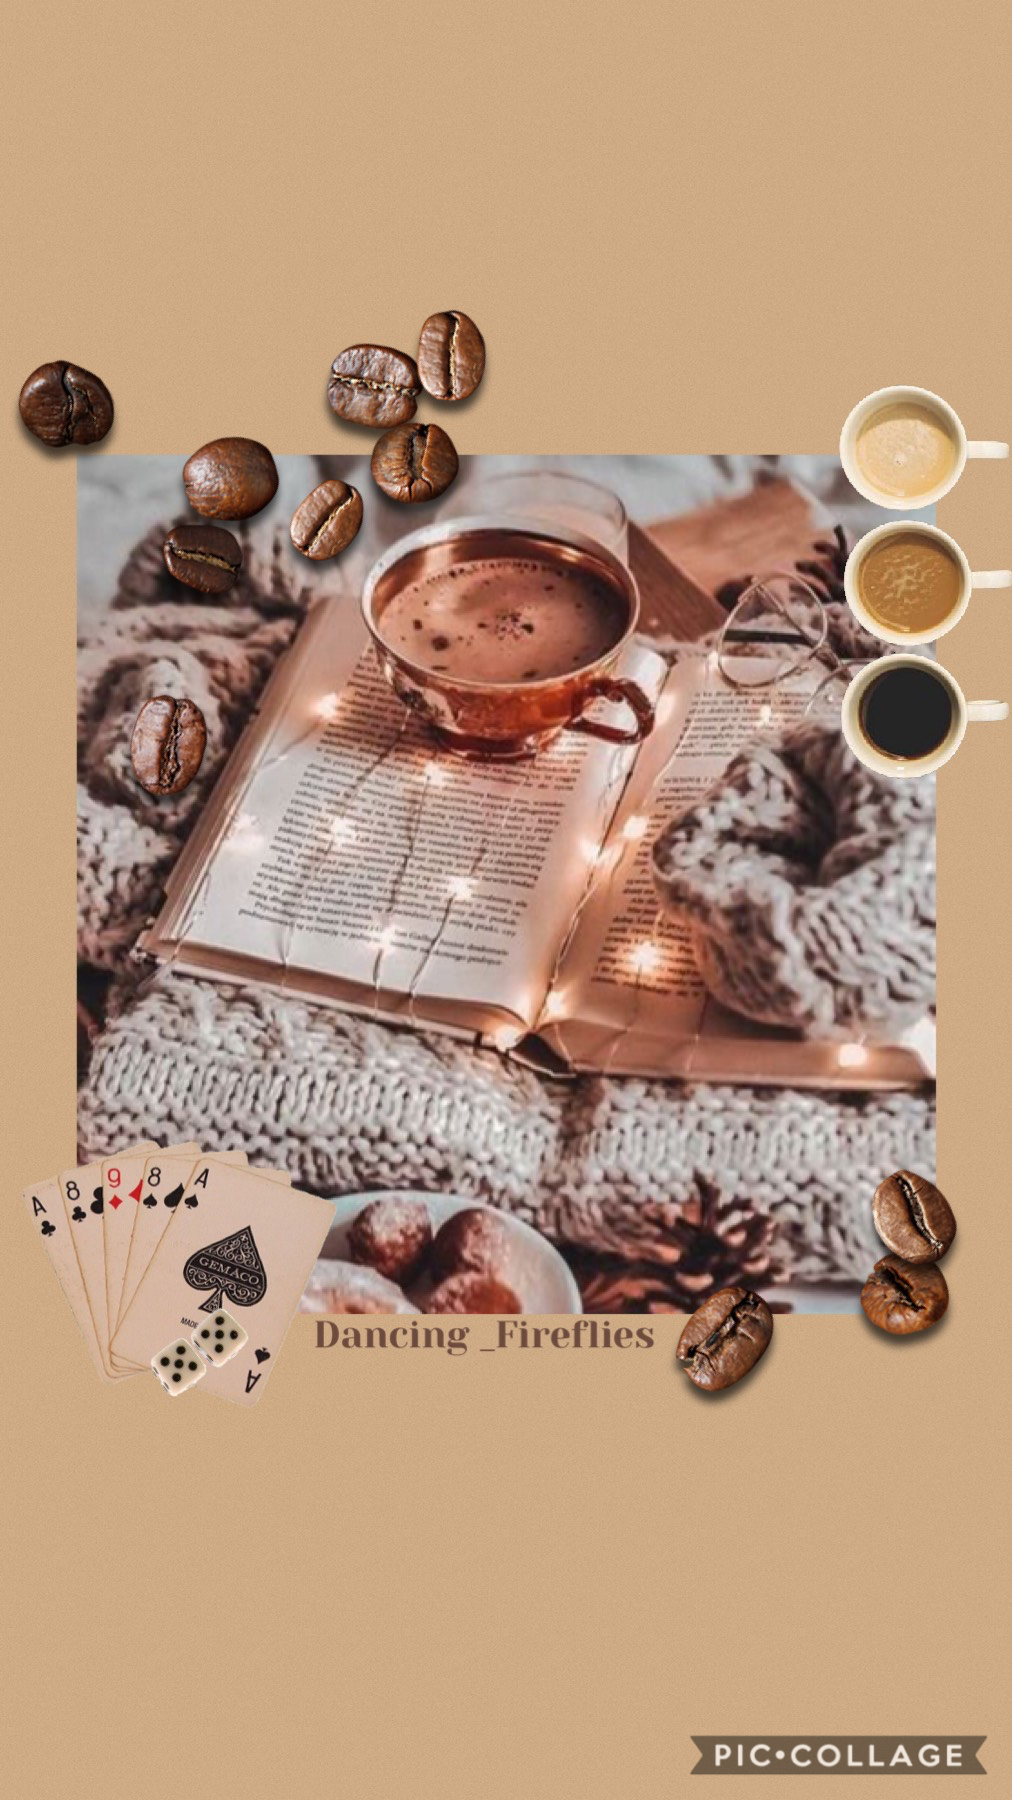 ☕️TAP☕️
This collage is Inspired my Shamsies (I hope is spelled that right). Thank you for 350 followers! I actually don’t like coffee but I loved the vibes coming off this. (5/7/21)
Qotd: Do you like coffee?
Aotd: no I do not like coffee!